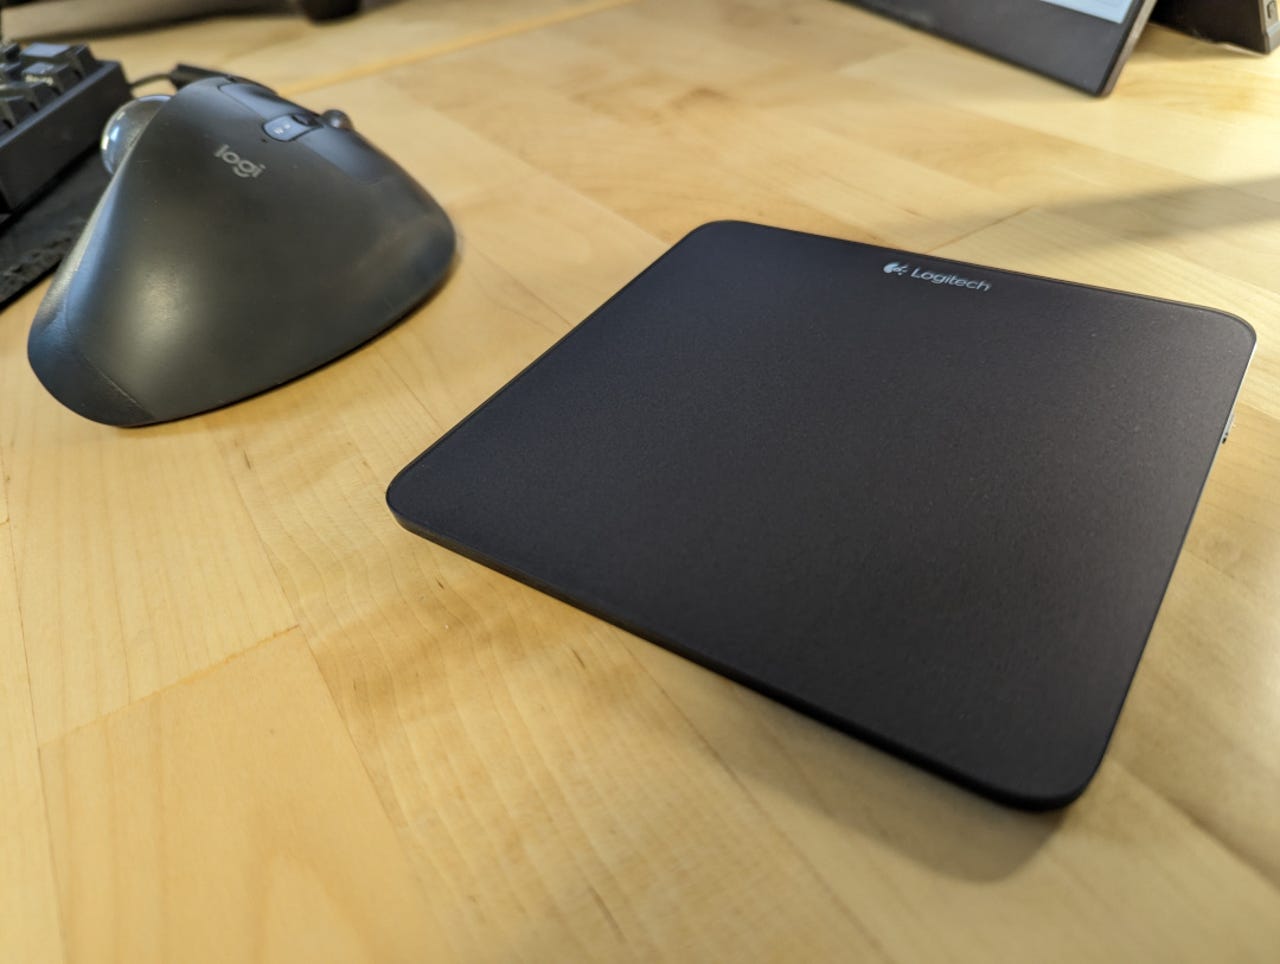 The Logitech T650 touchpad.